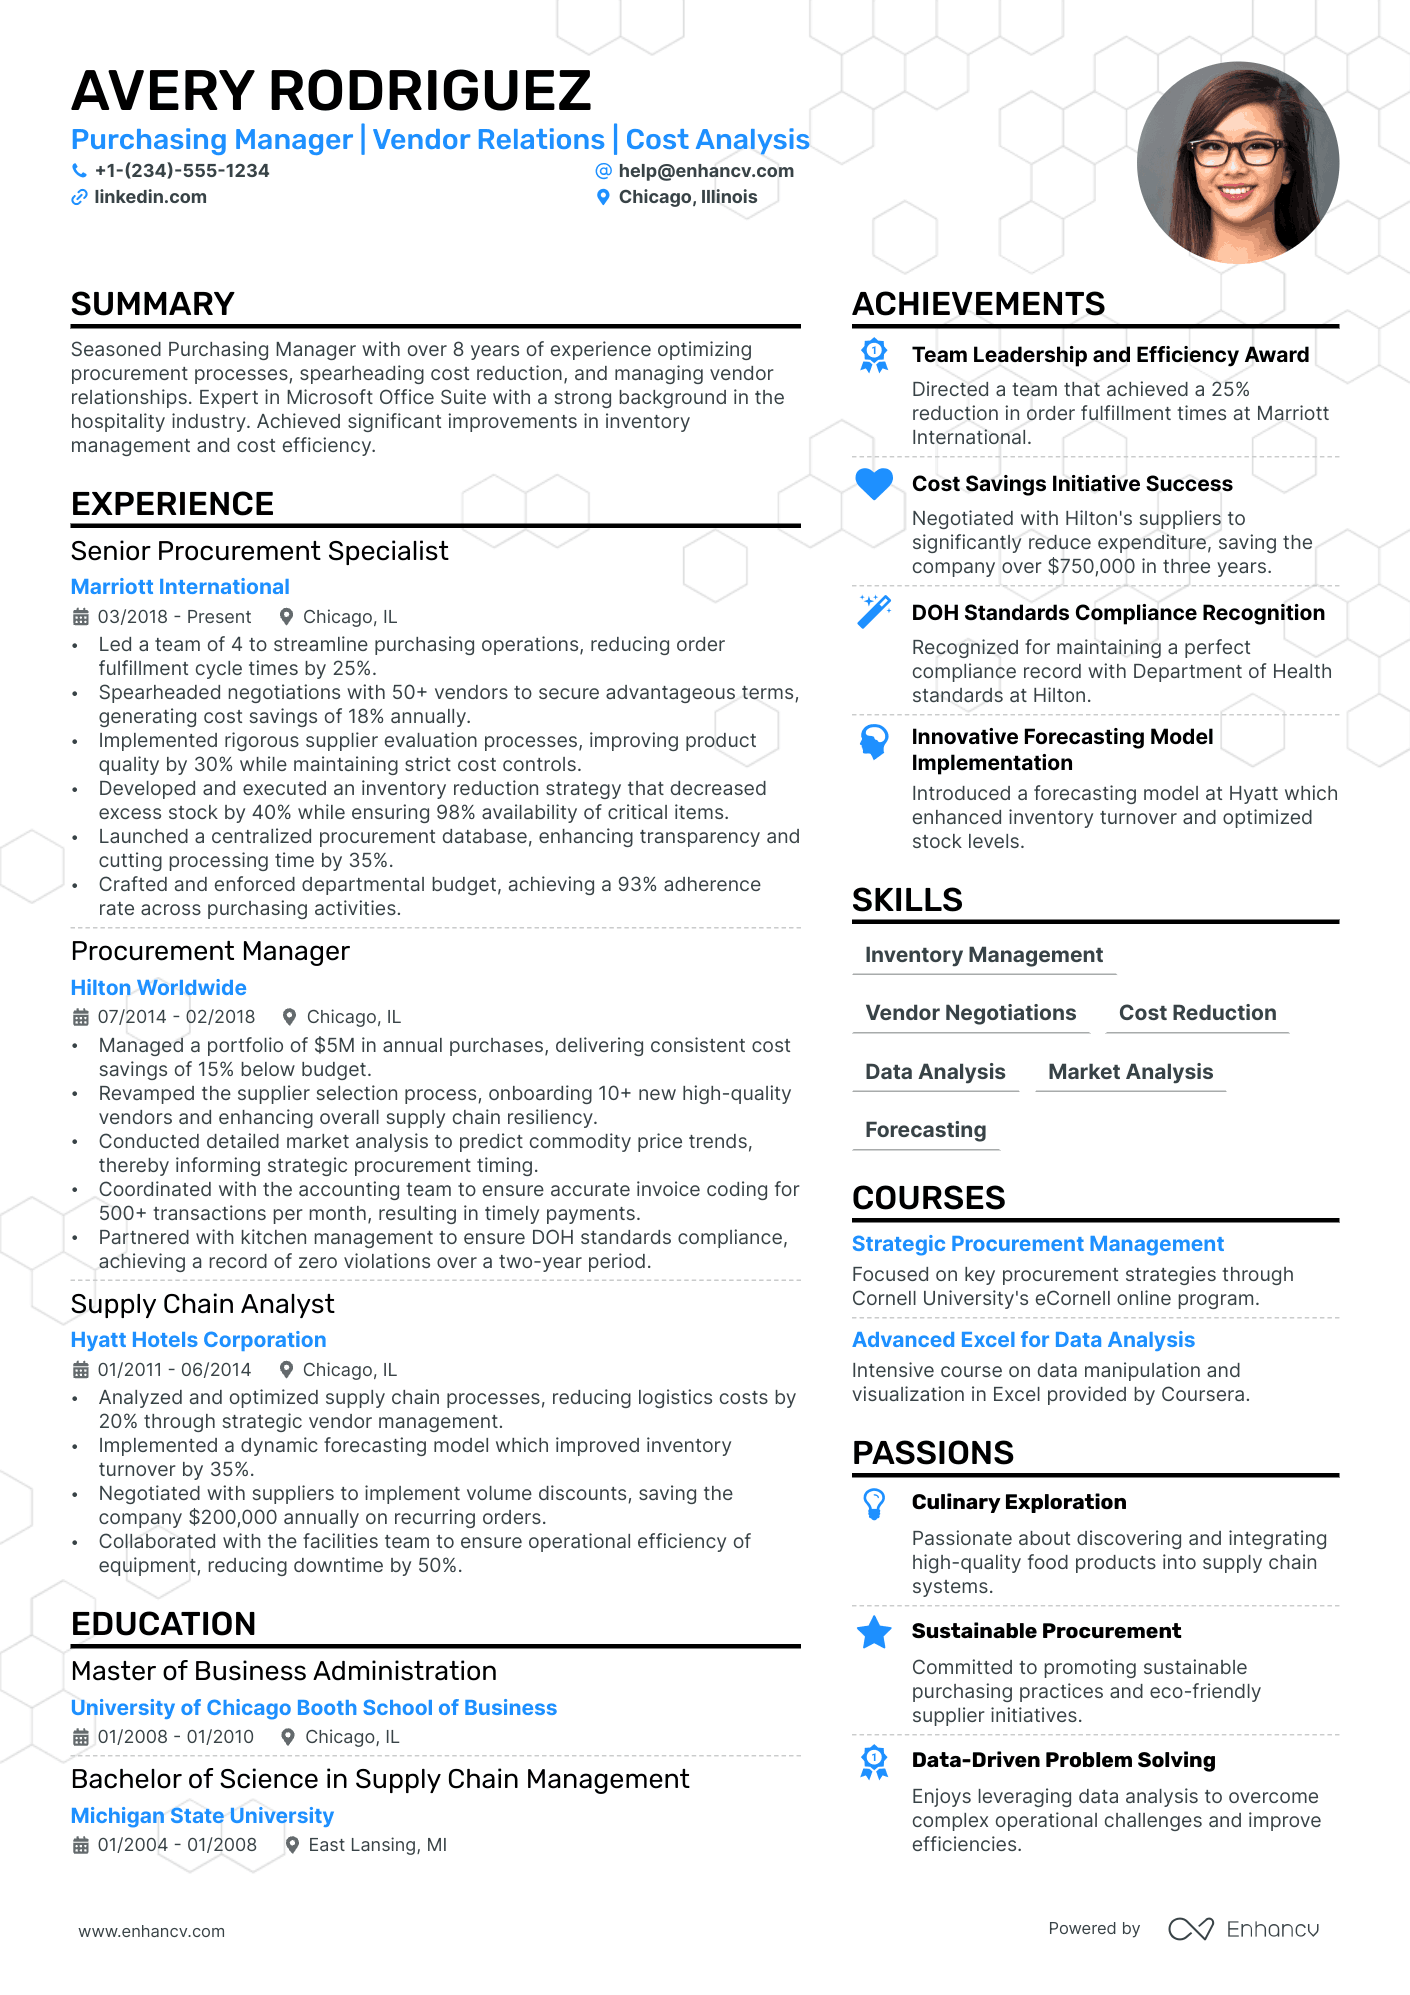 Purchase Manager resume example